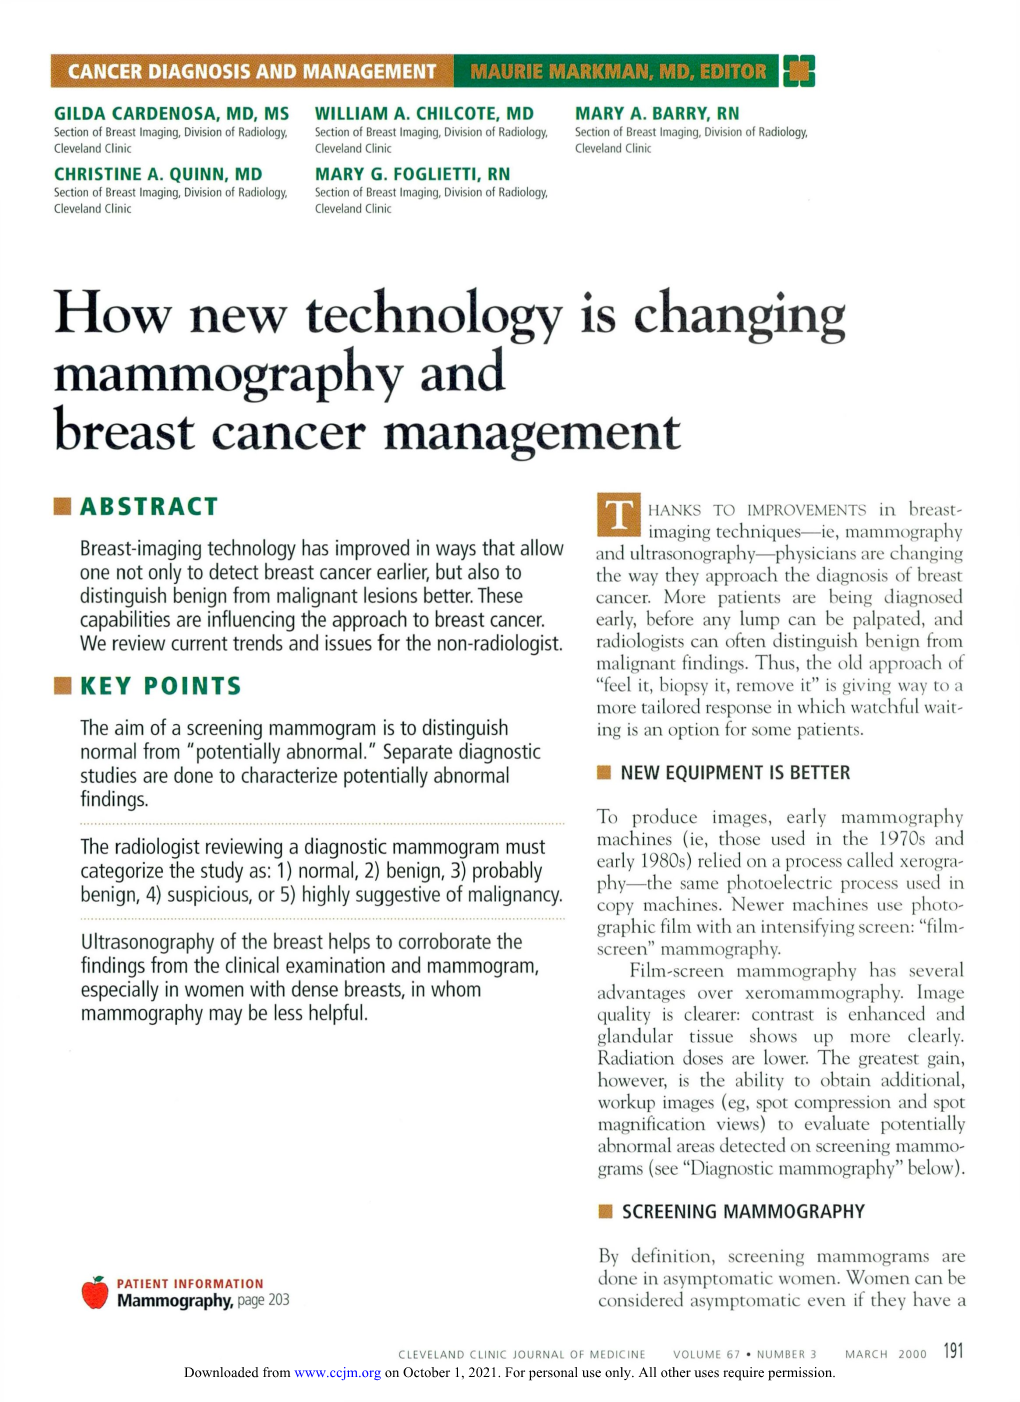 How New Technology Is Changing Mammography and Breast Cancer Management